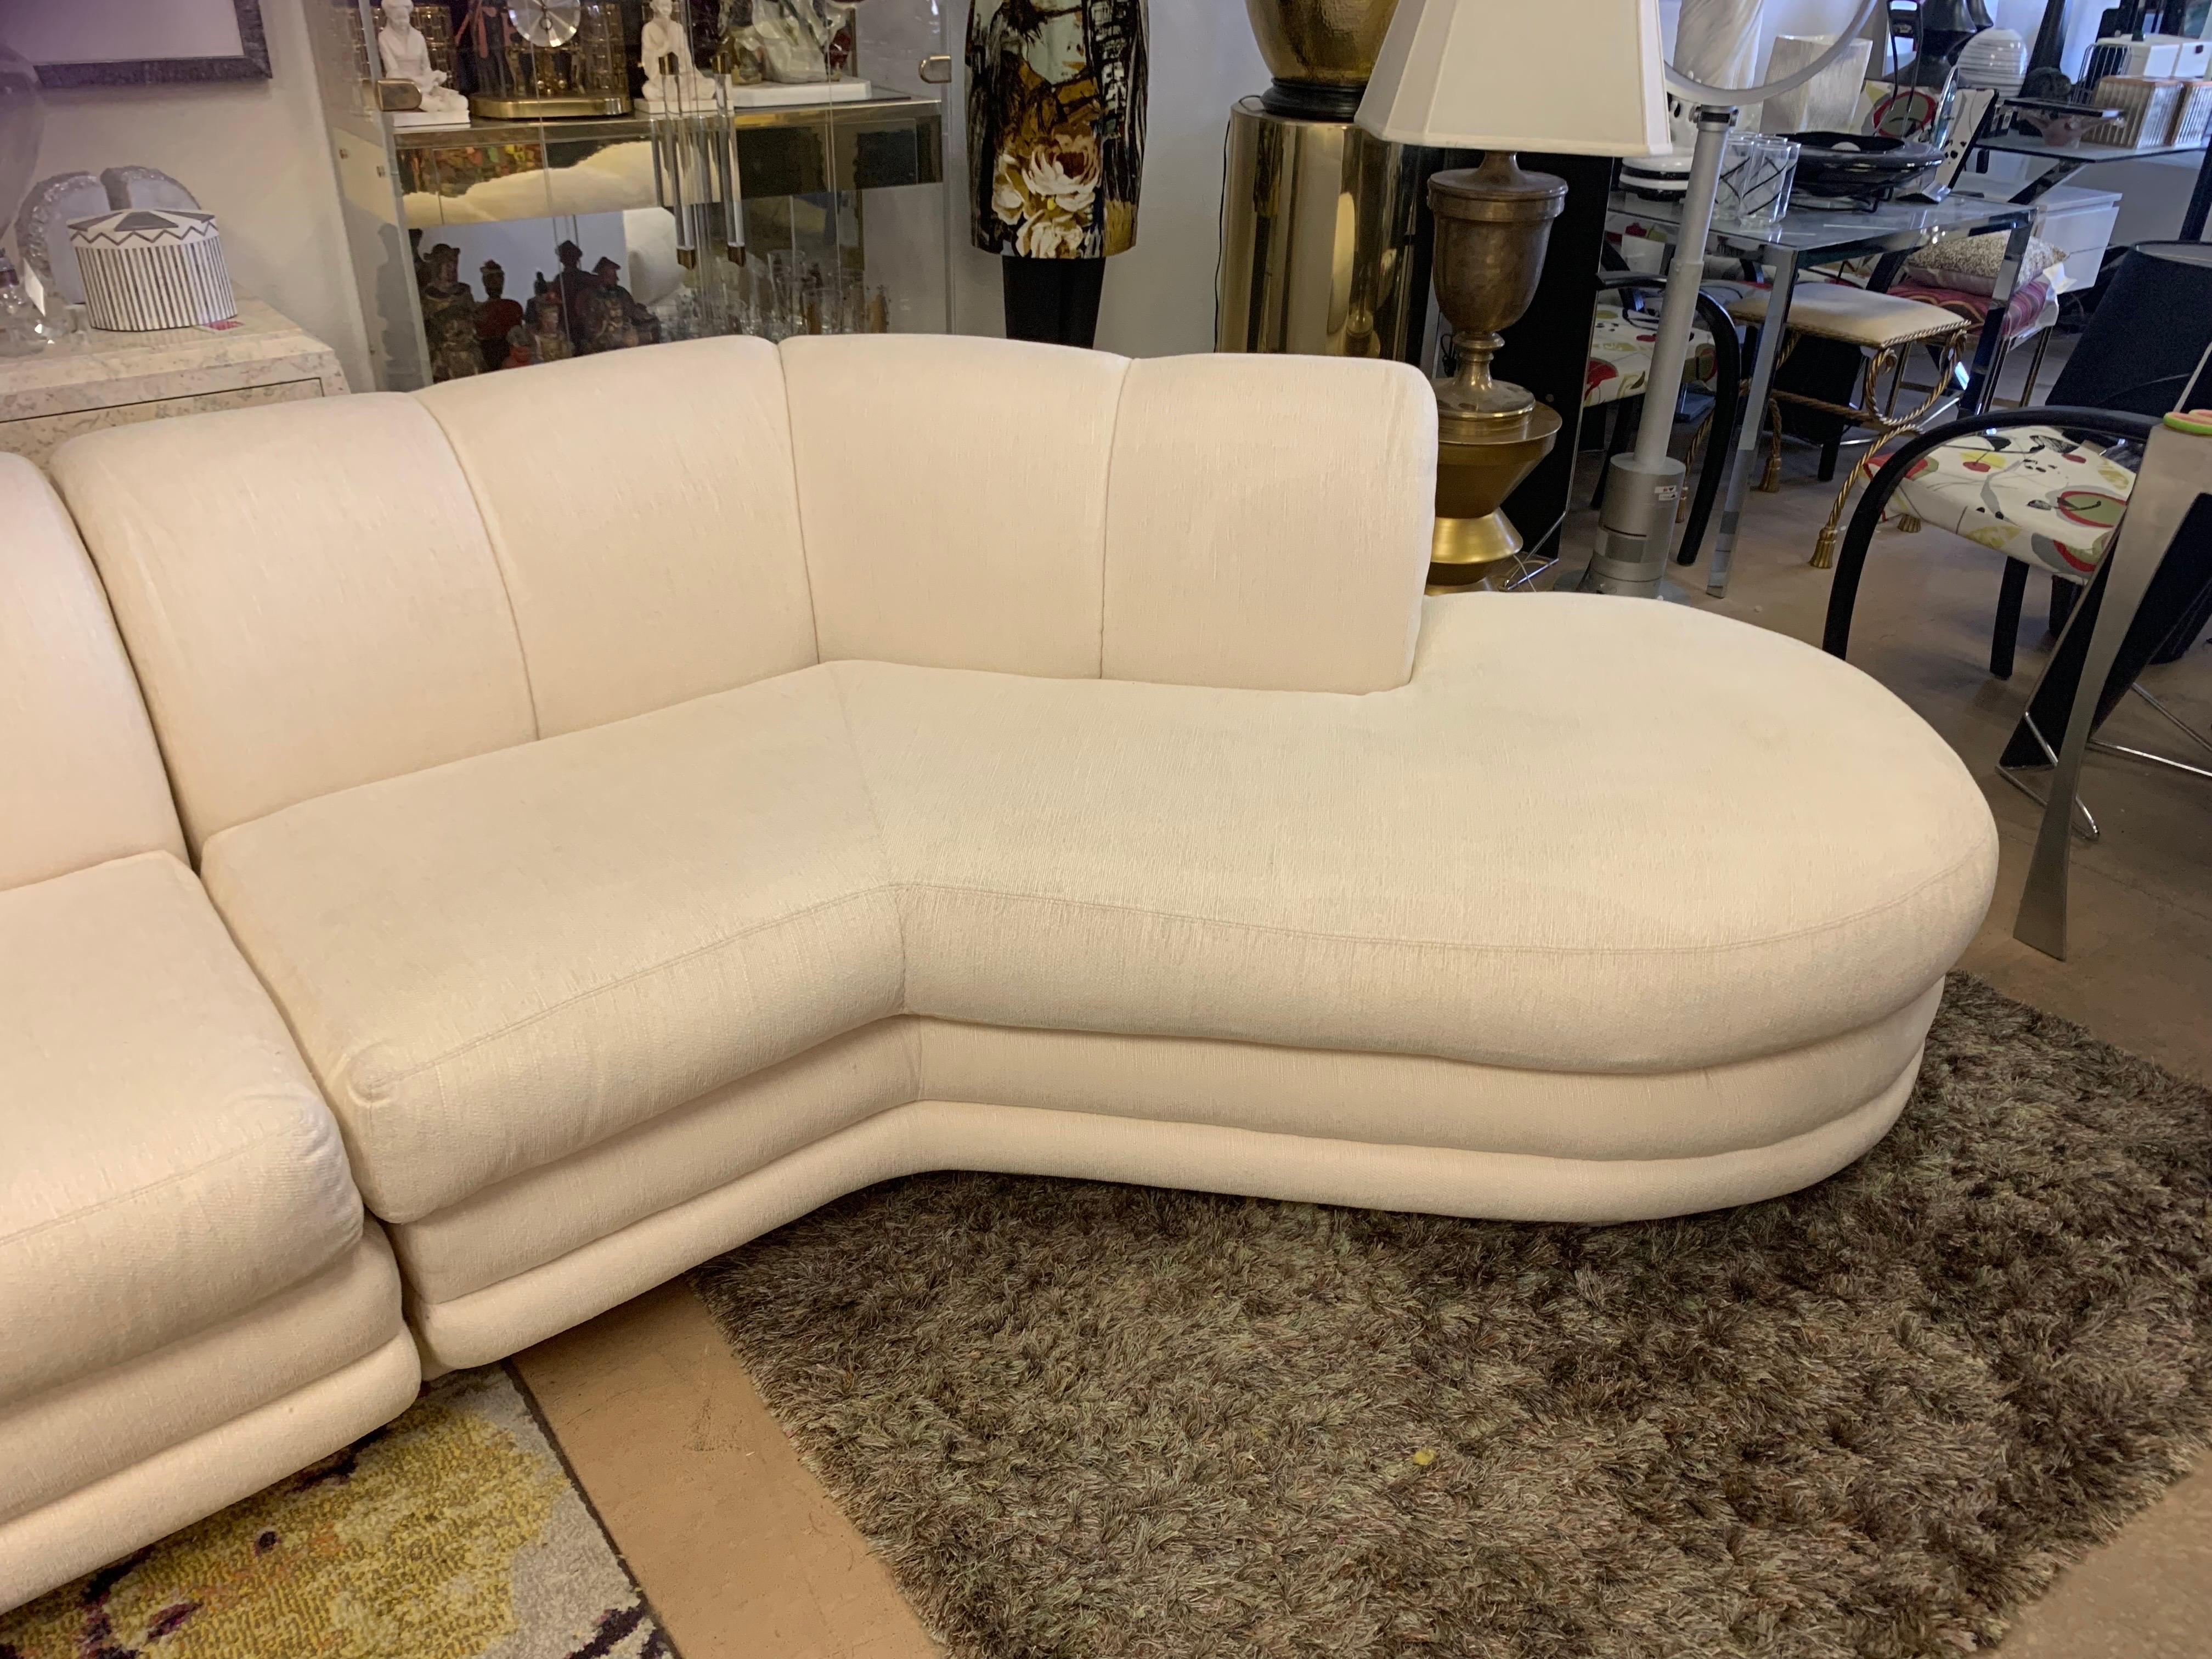 Late 20th Century Directional All Original Four Piece Sectional Sofa in the Style of Steve Chase